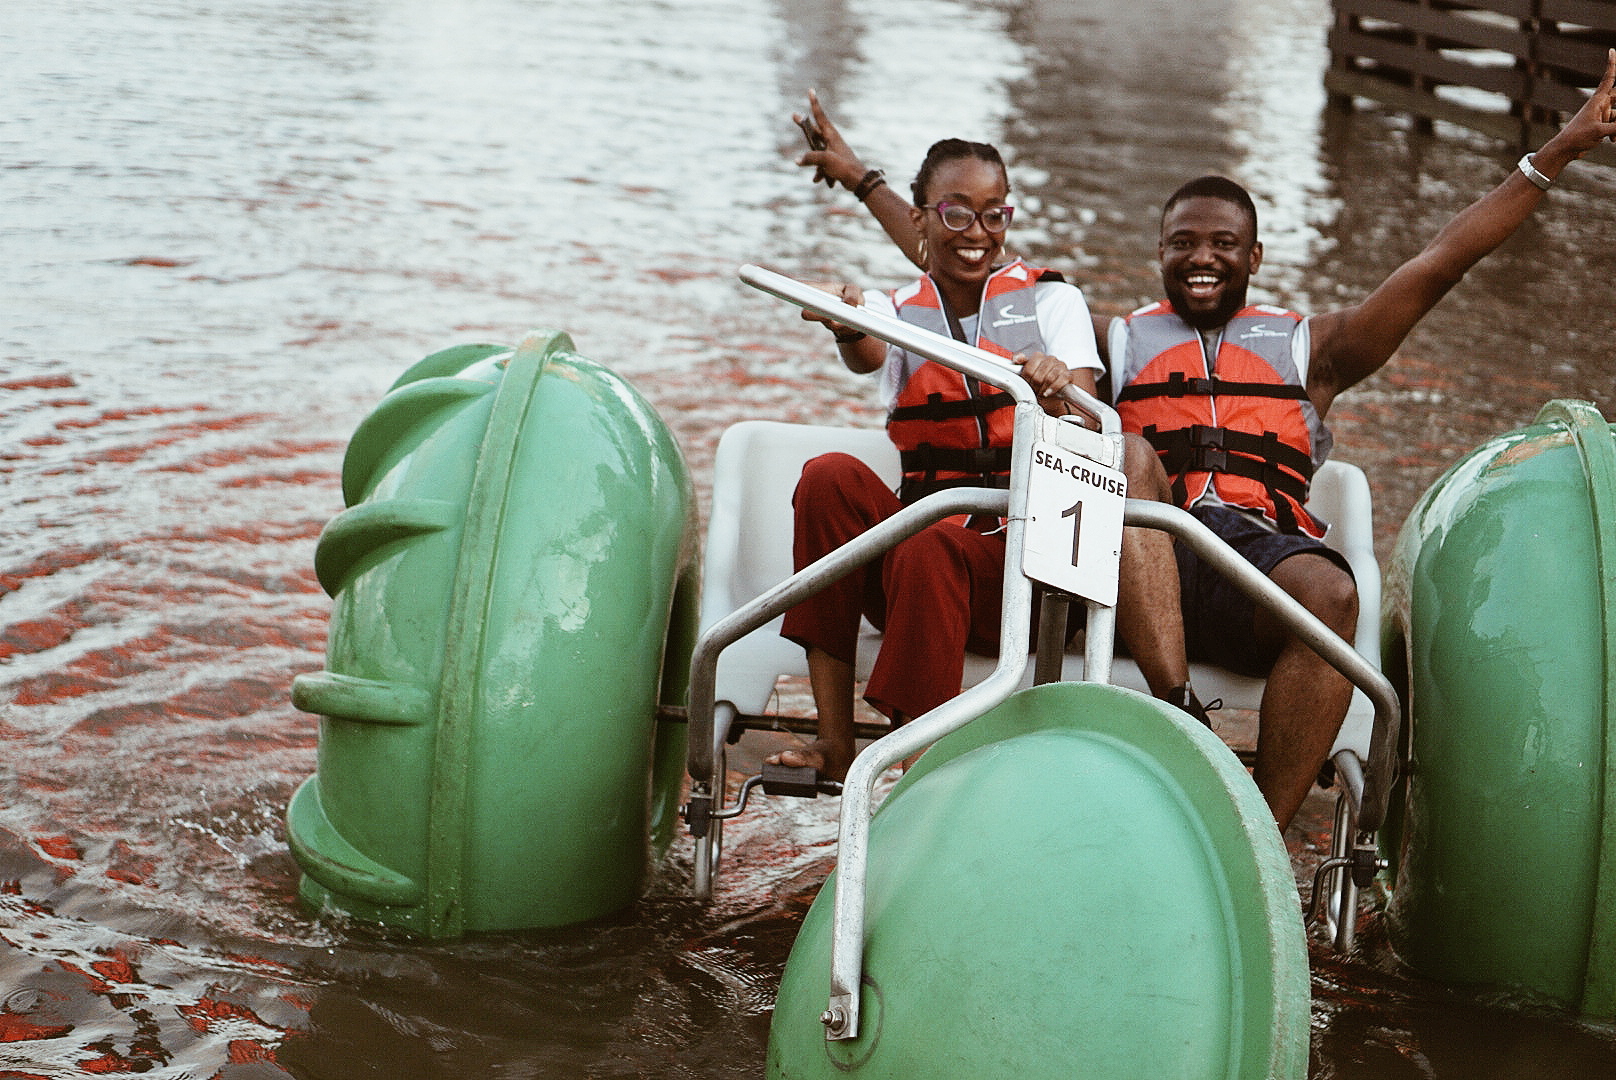 sea tractor cruise - things to do in lekki